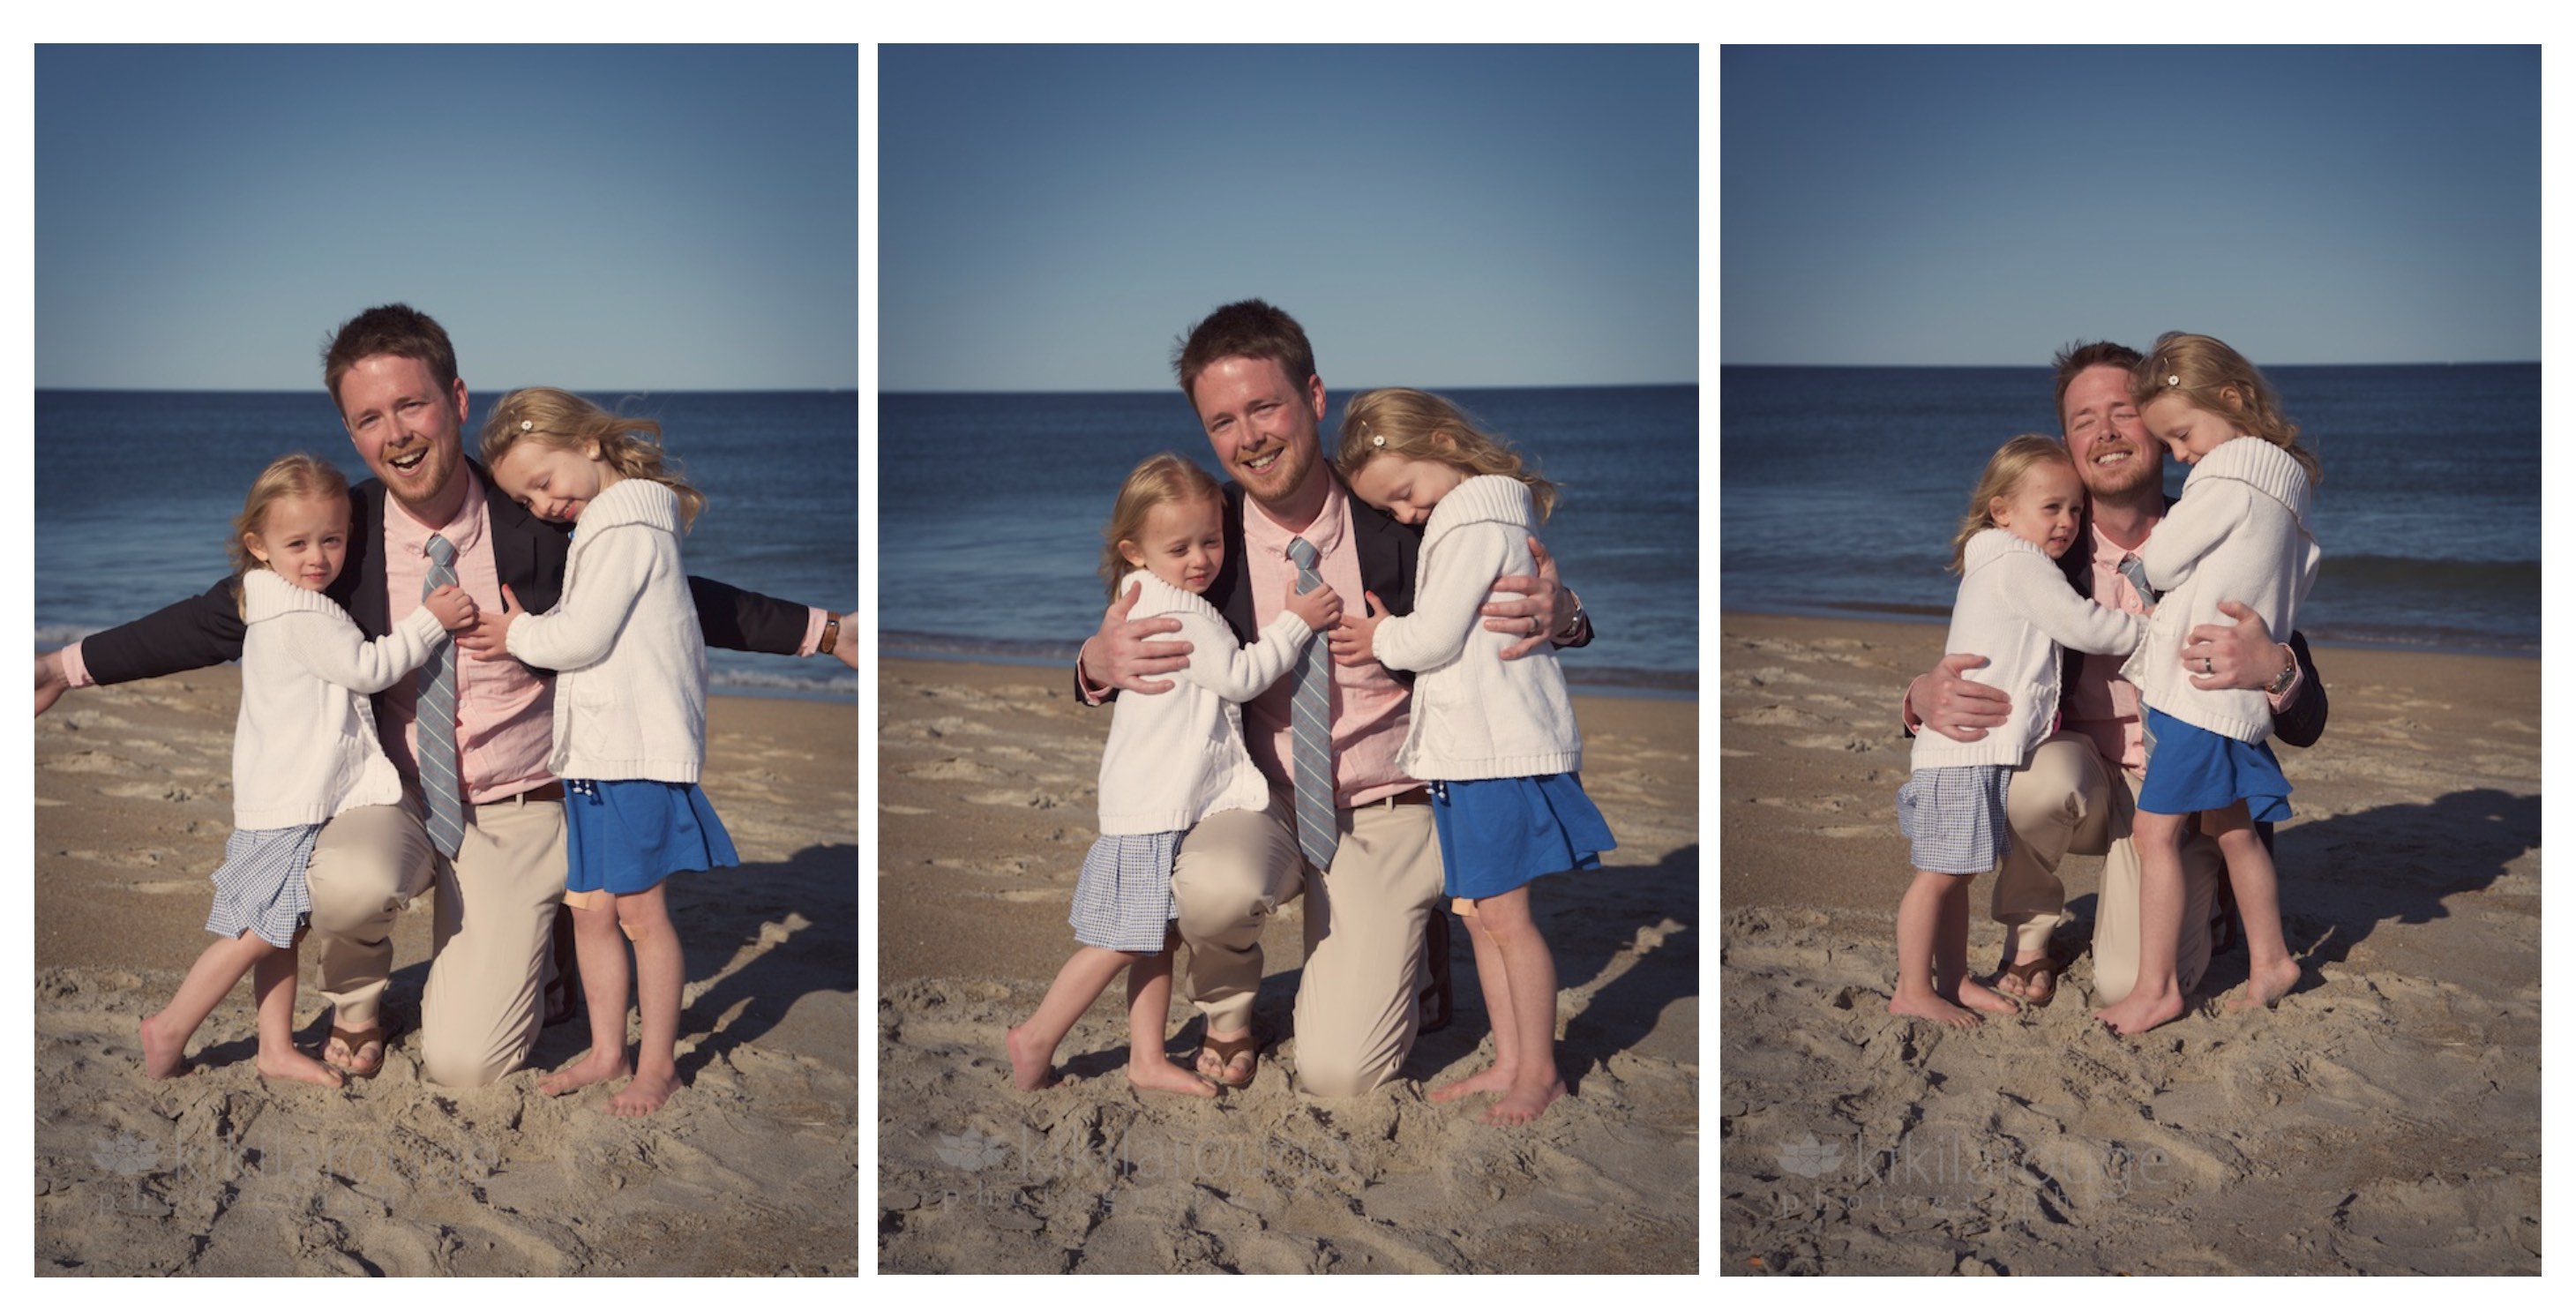 Groom with his nieces on beach